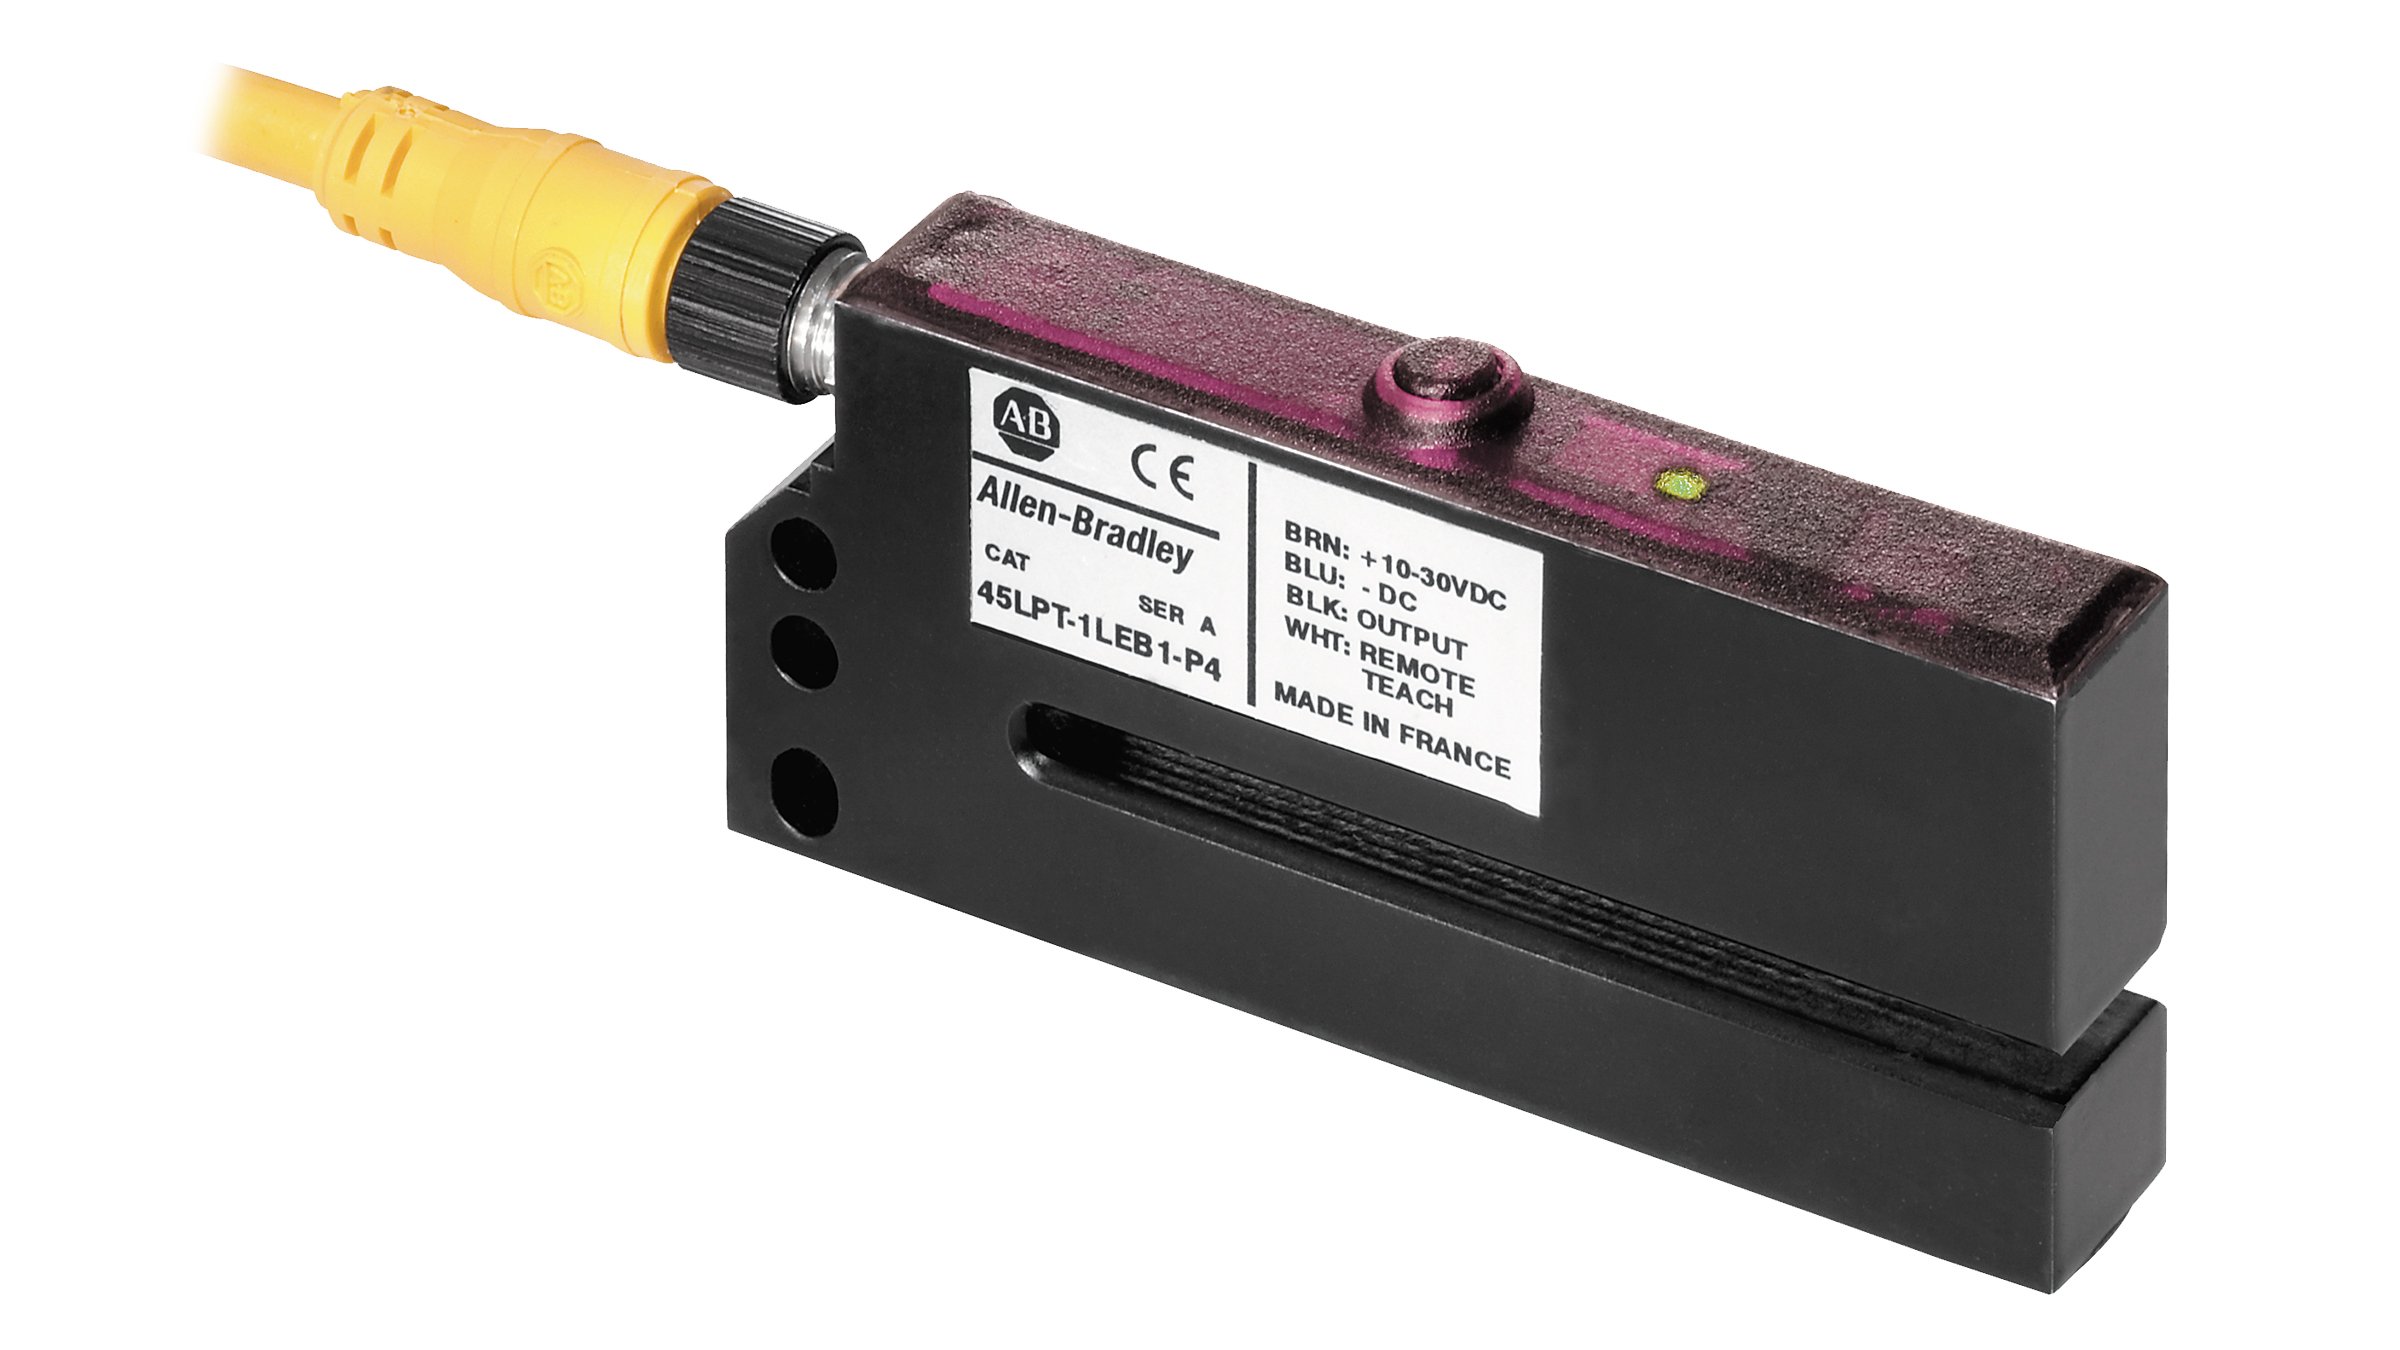 Allen-Bradley black, rectangular slotted photoelectric label sensor with a yellow connector.